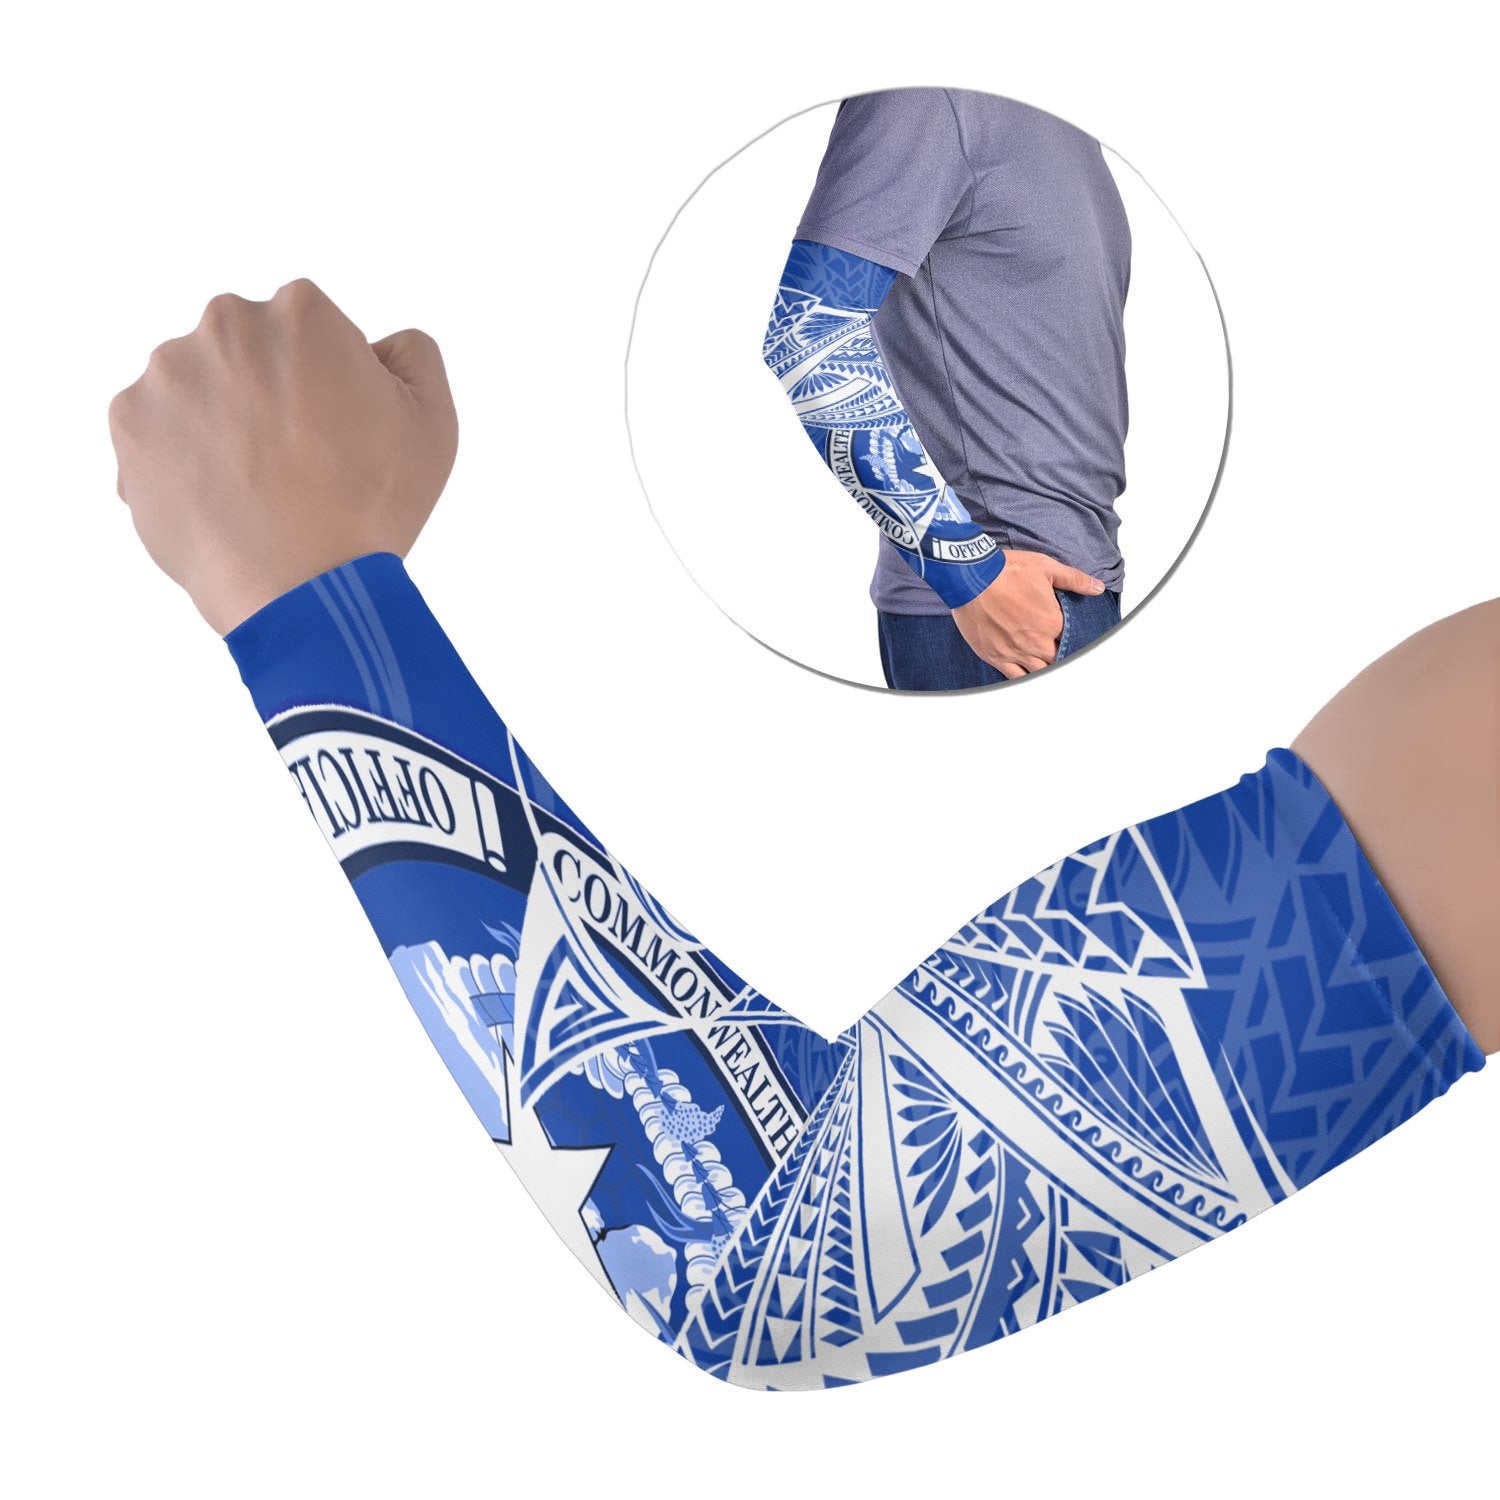 Northern Mariana Islands Arm Sleeve (Set of 2) - Seal CNMI With Curve Patterns Set of 2 Blue - Polynesian Pride